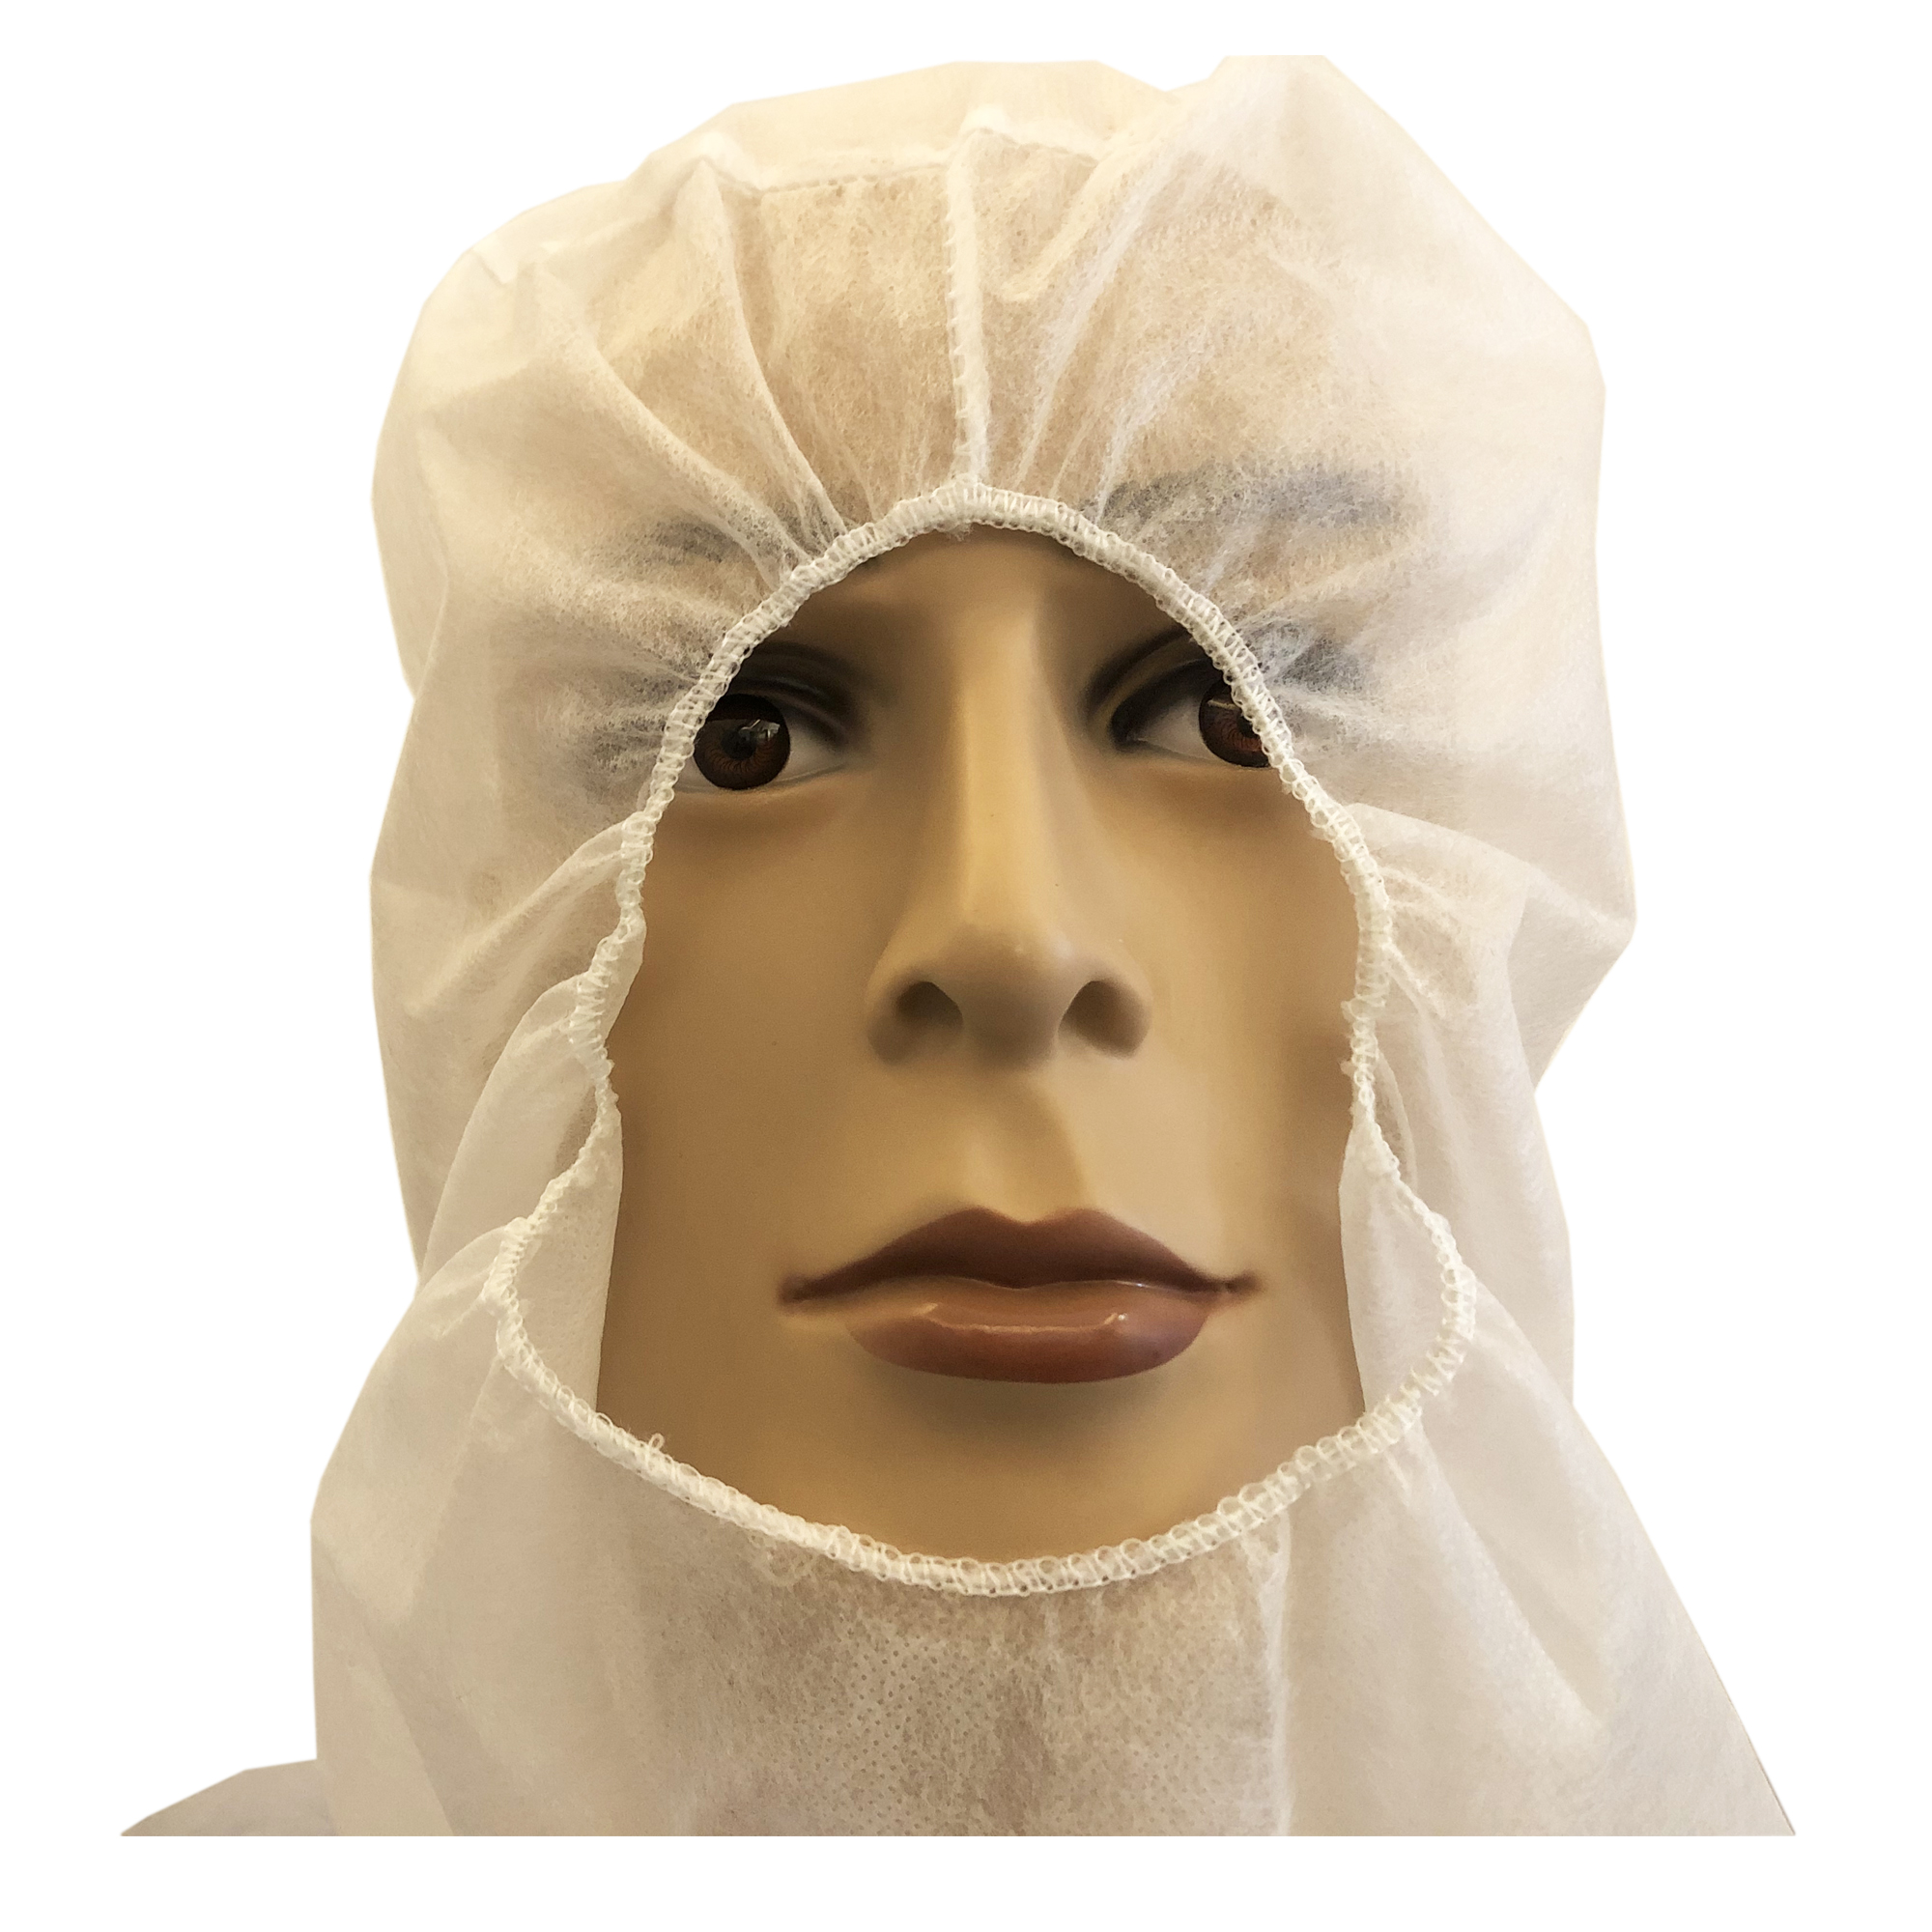 Disposable Nonwoven Head Cover for Workers